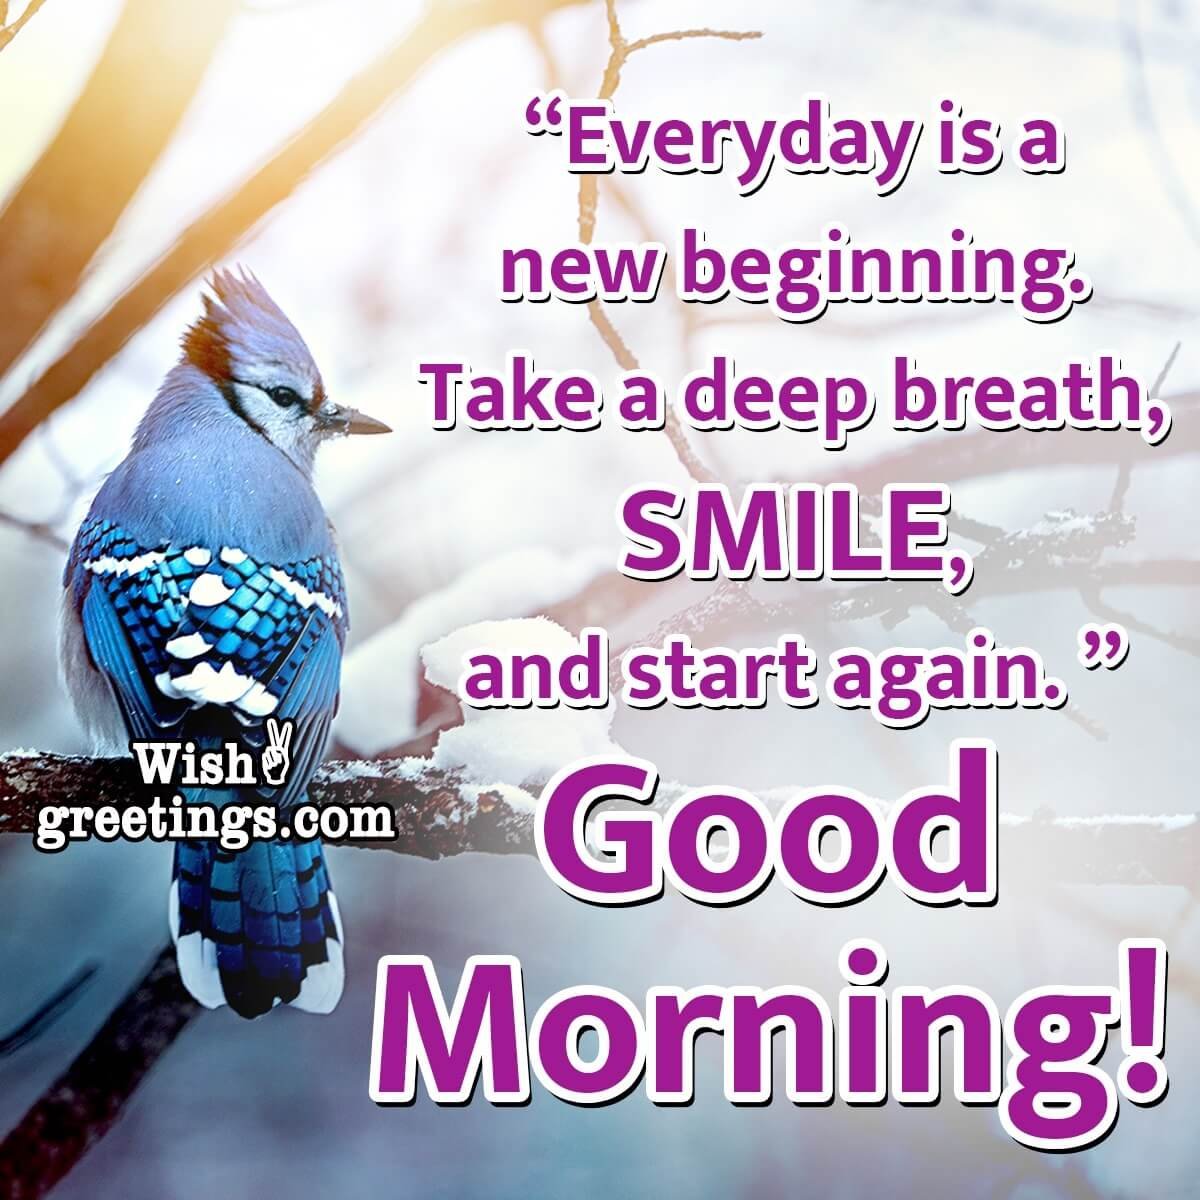 Good Morning Quotes - Wish Greetings